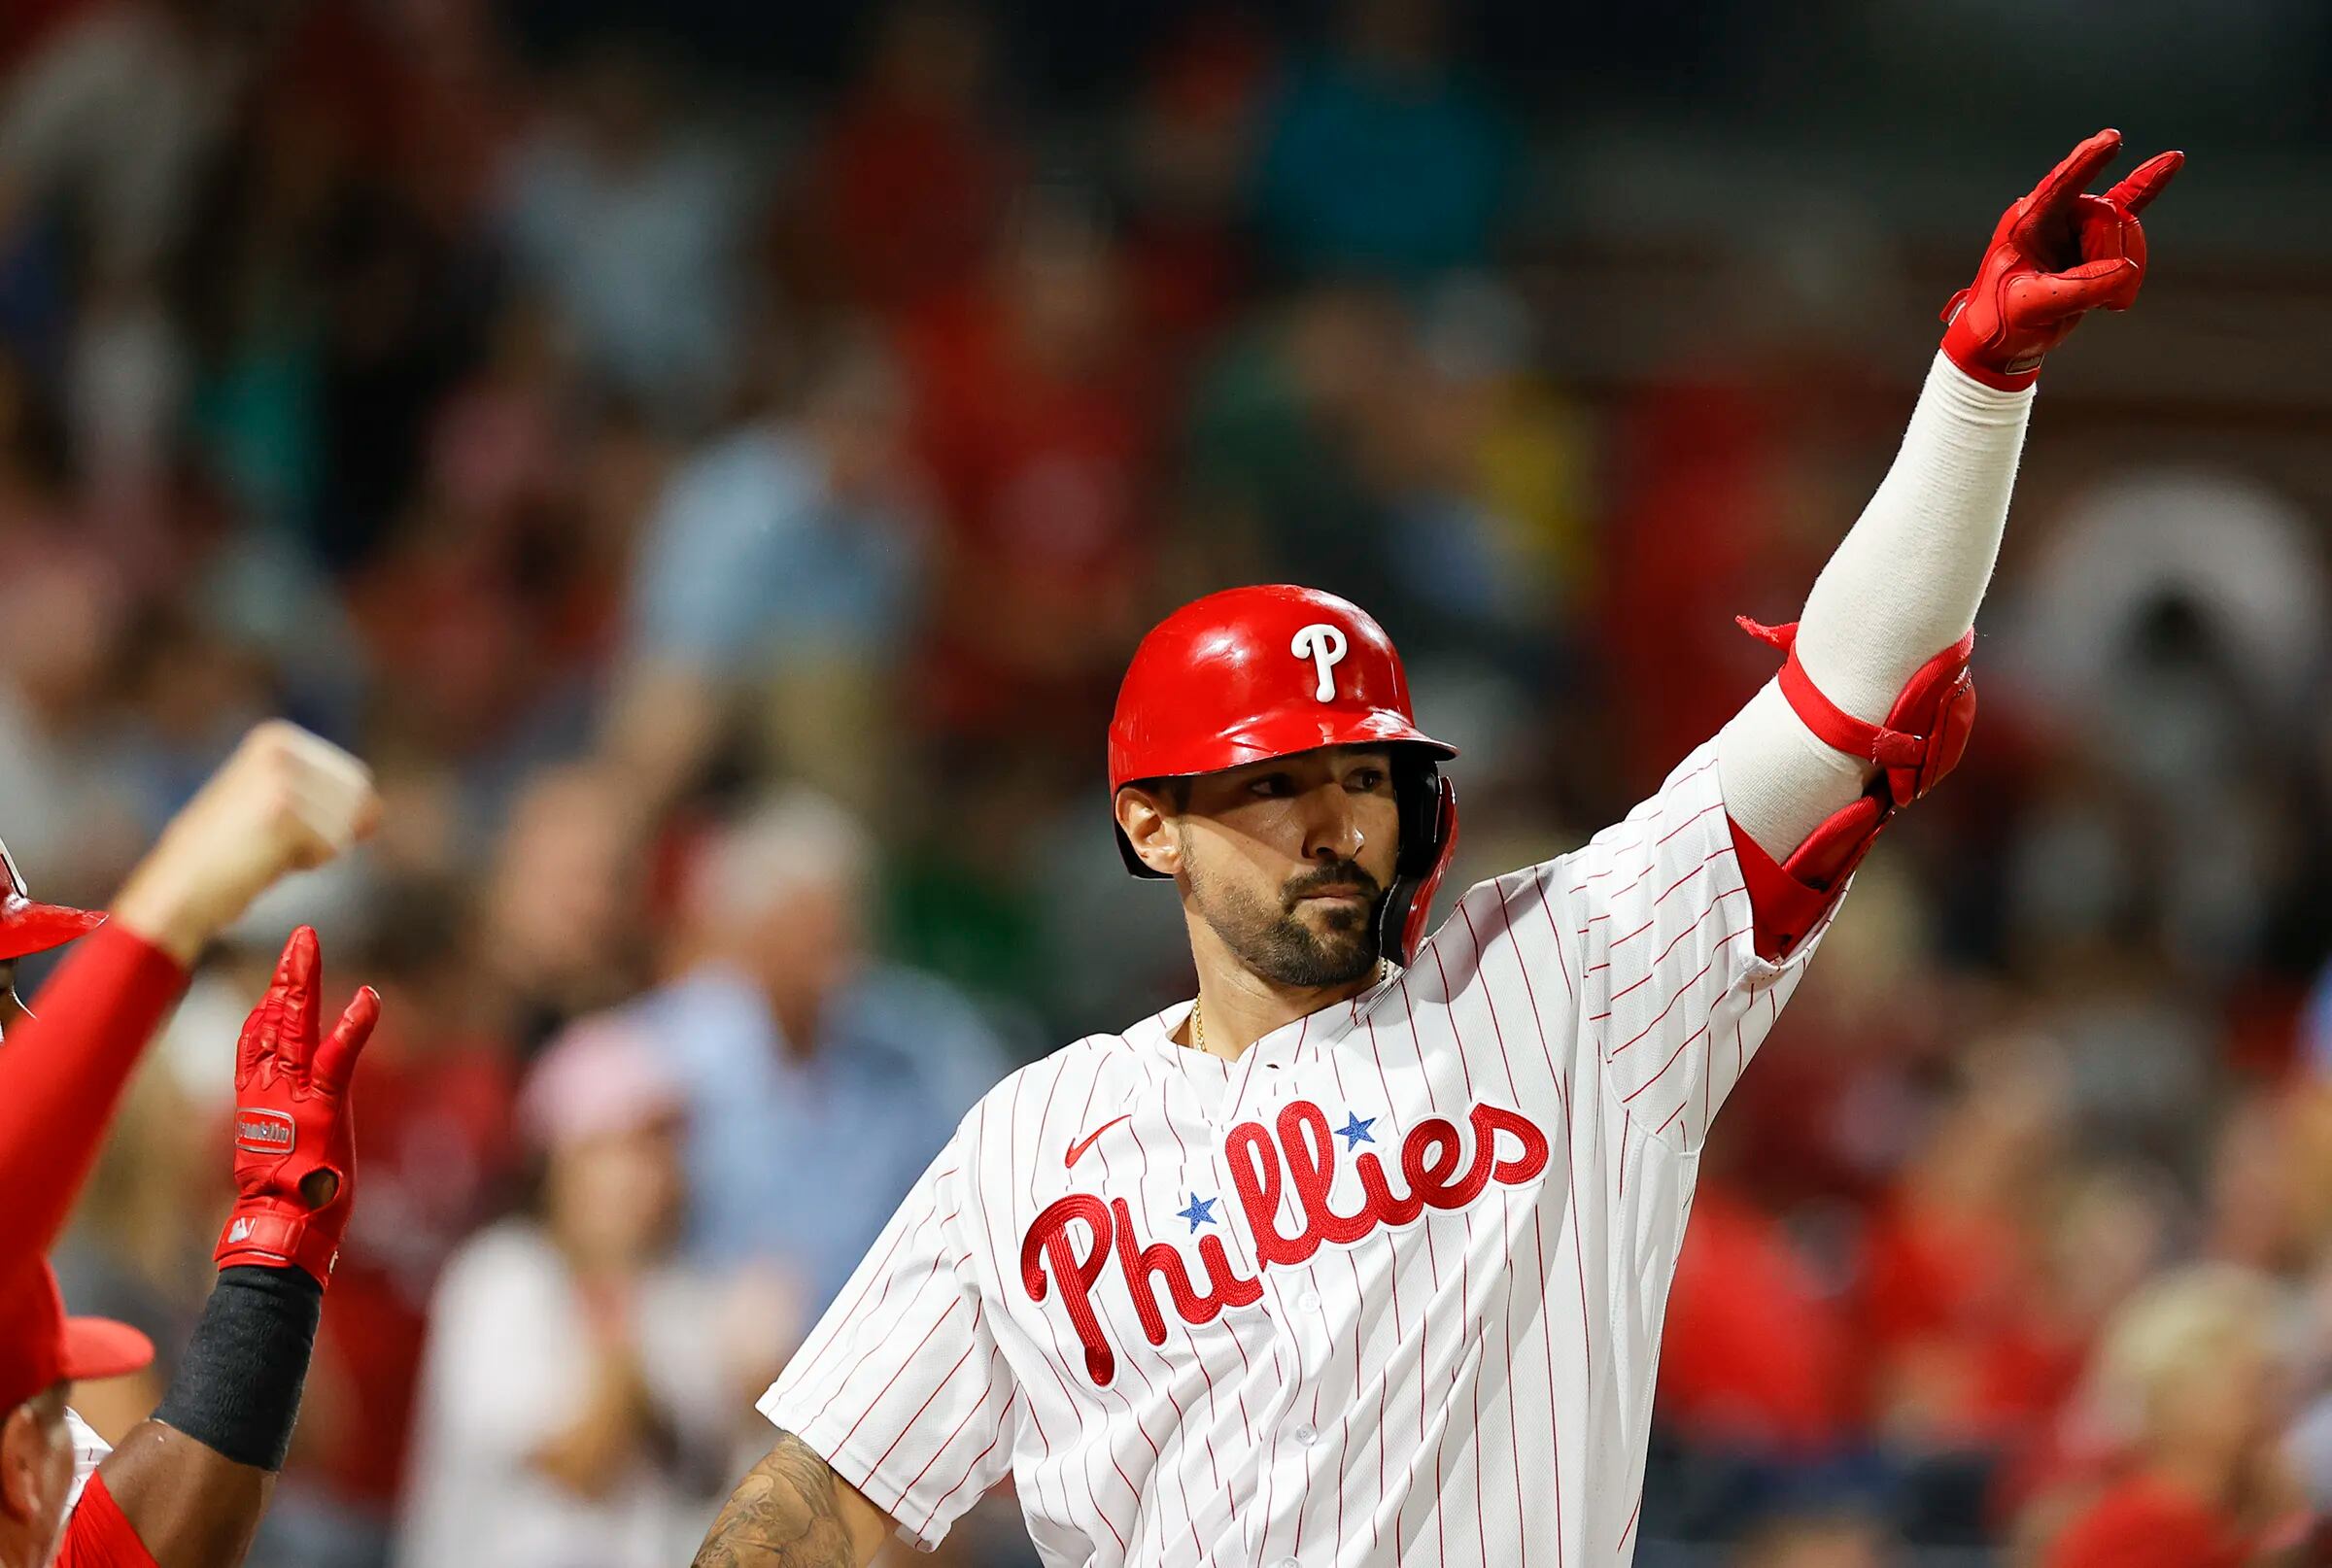 Phillies' September collapse puts wild card, playoff hopes in peril